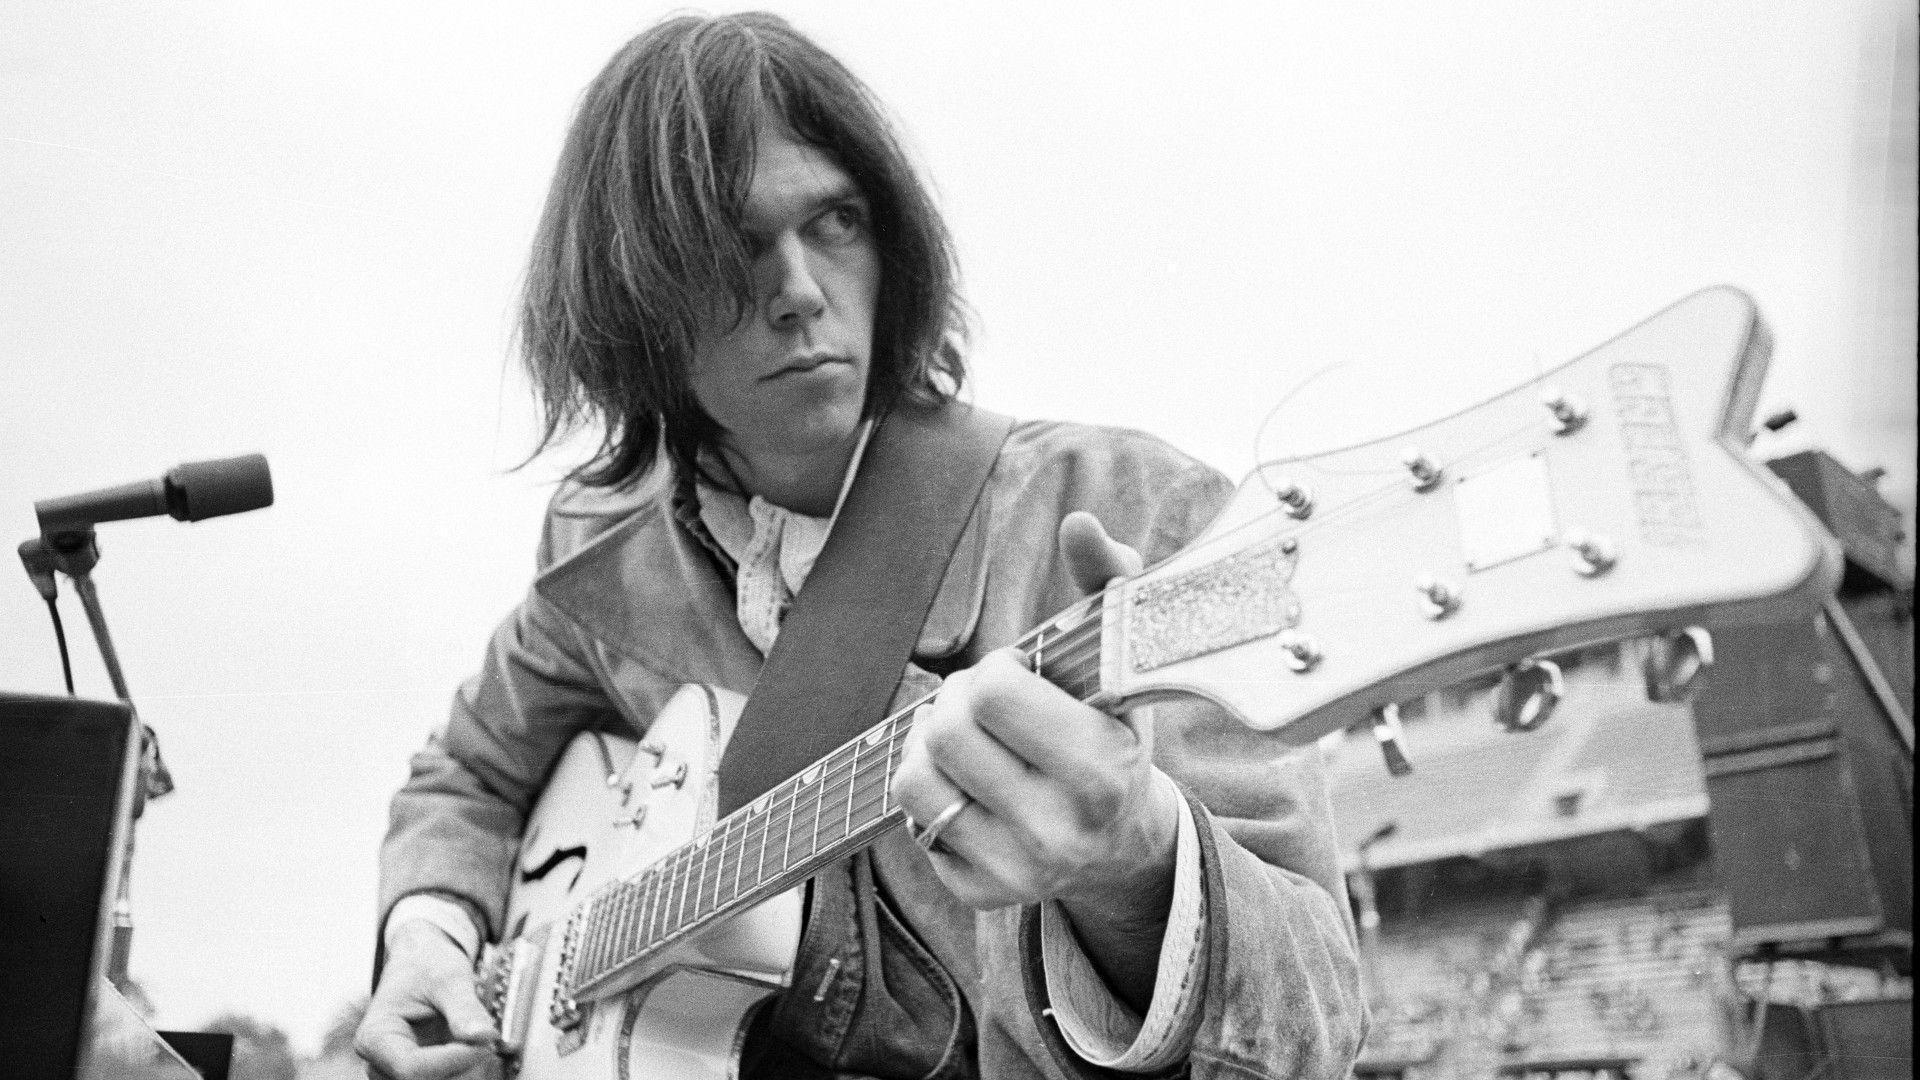 Download Wallpaper 1920x1080 Neil young, Guitar, Hair, Microphone